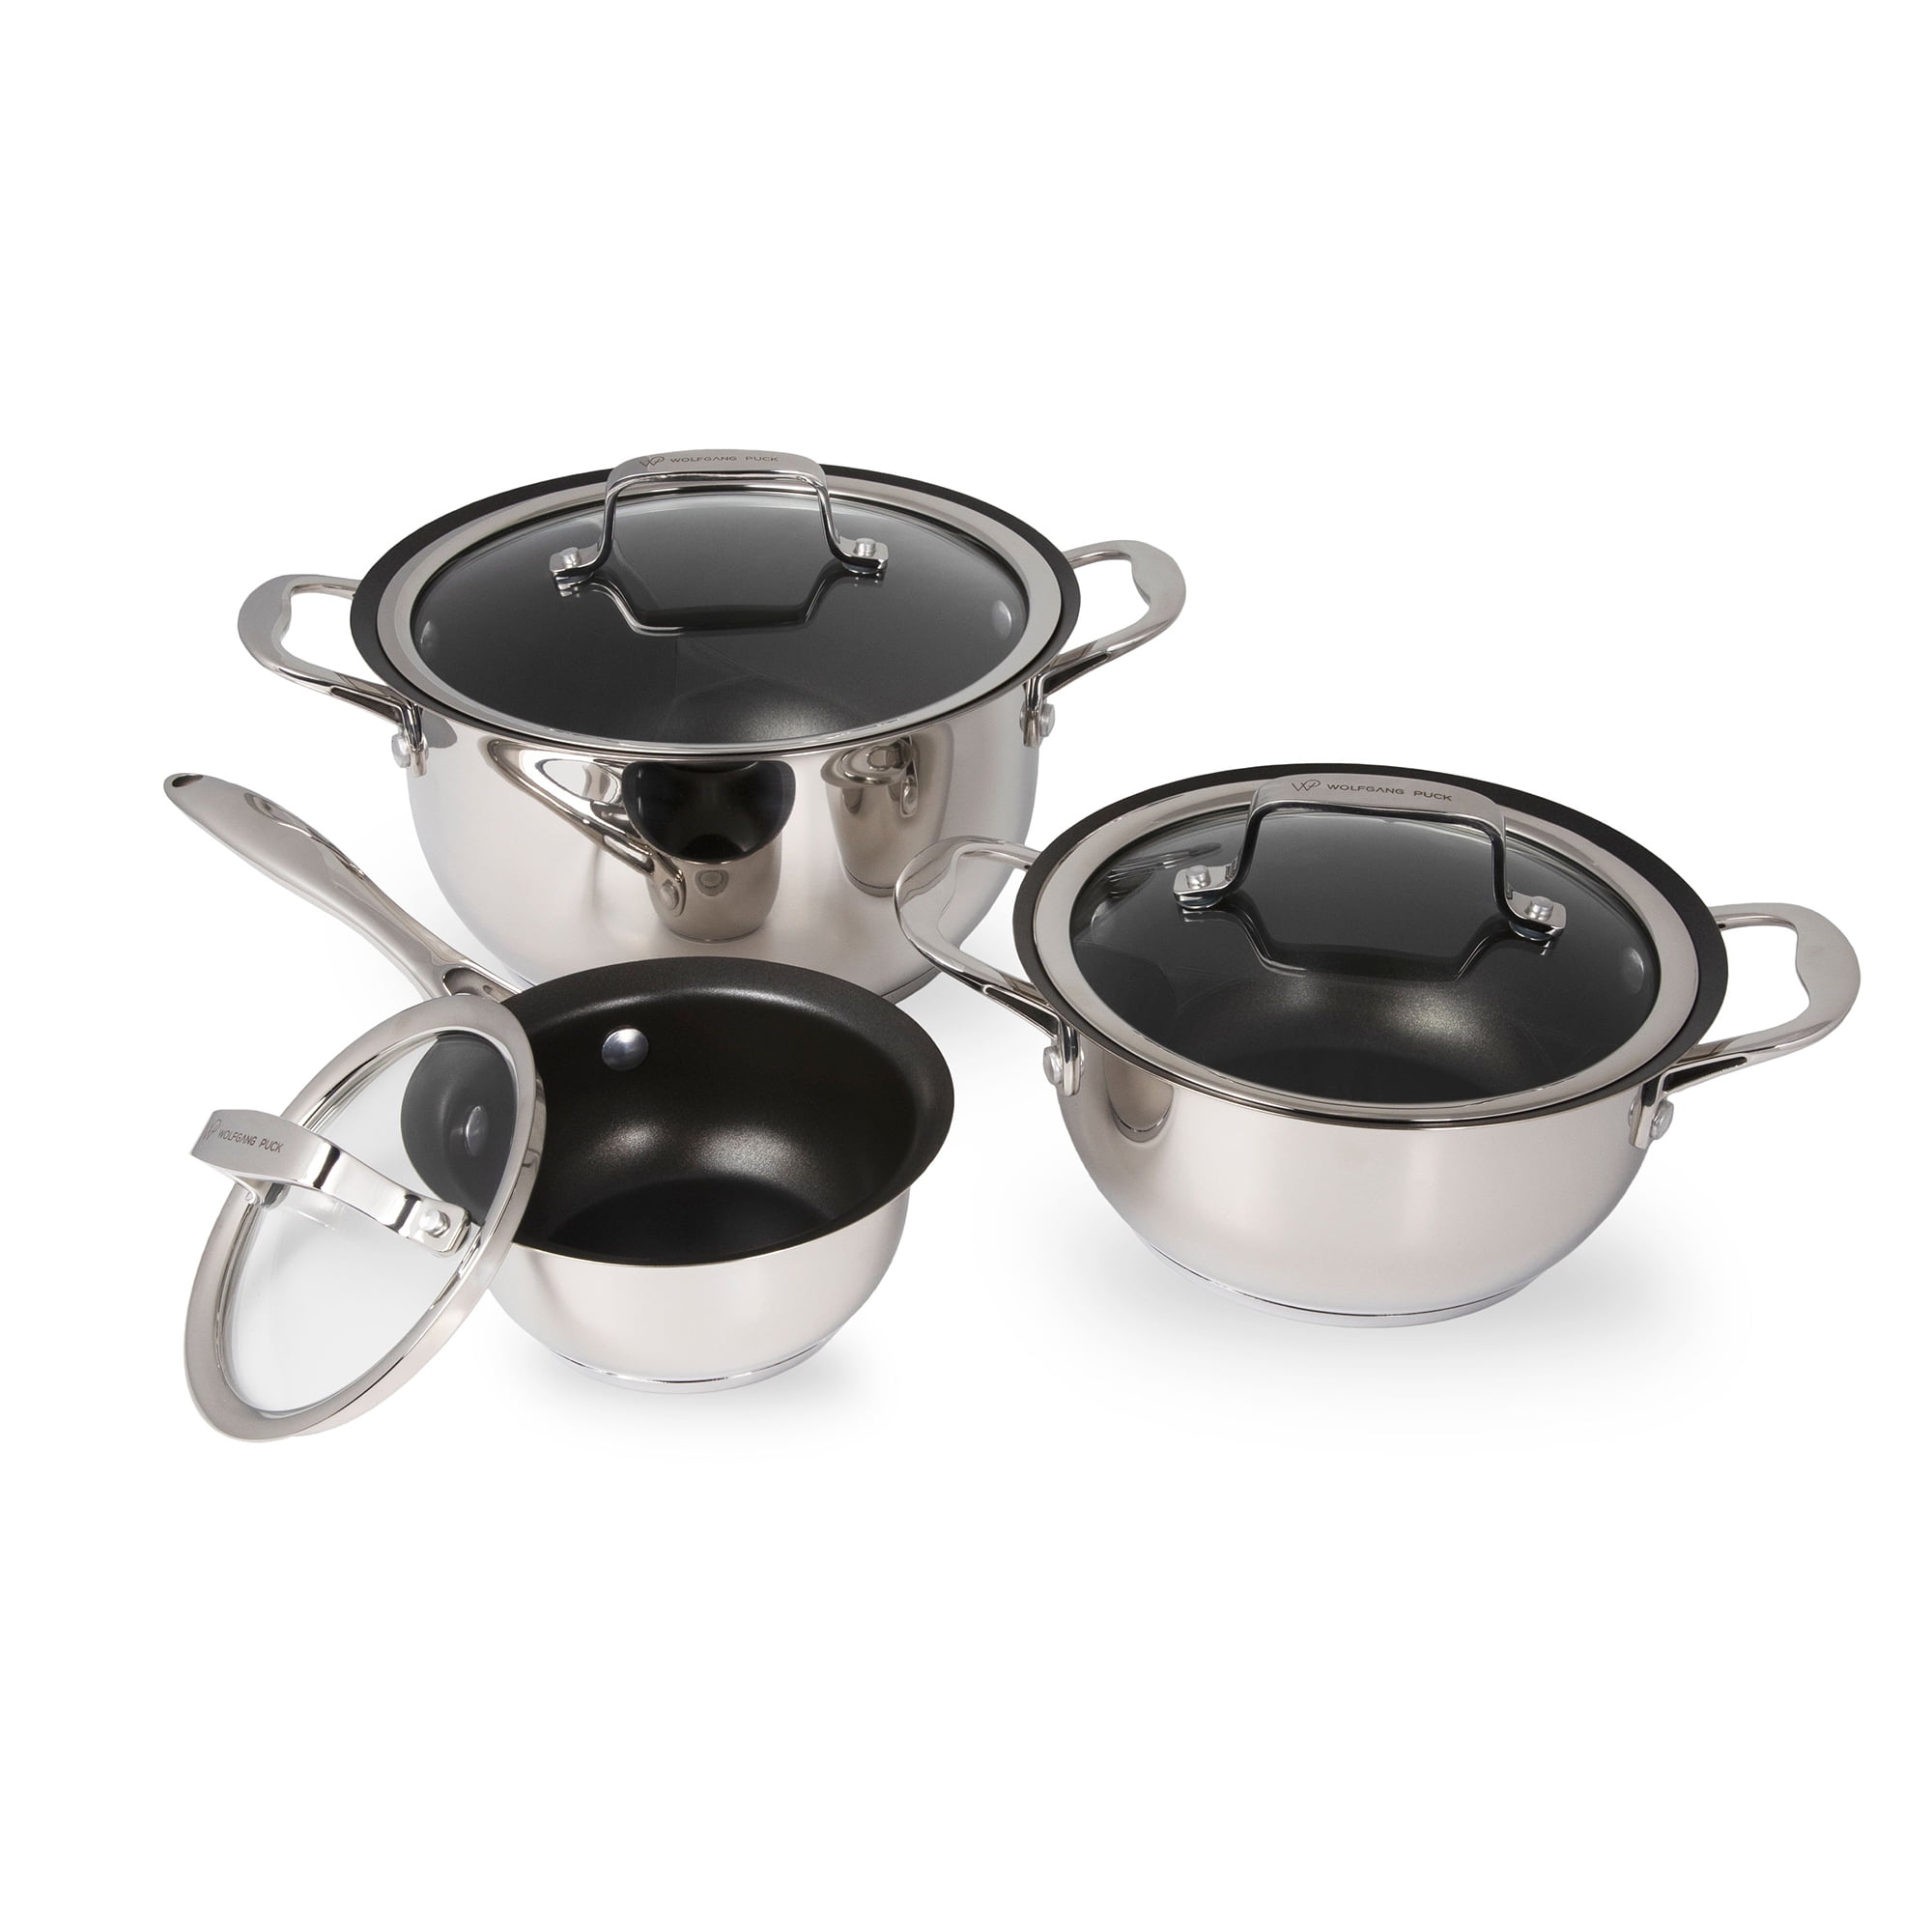 Cookware Set 8-Pc.-Welcome Aboard